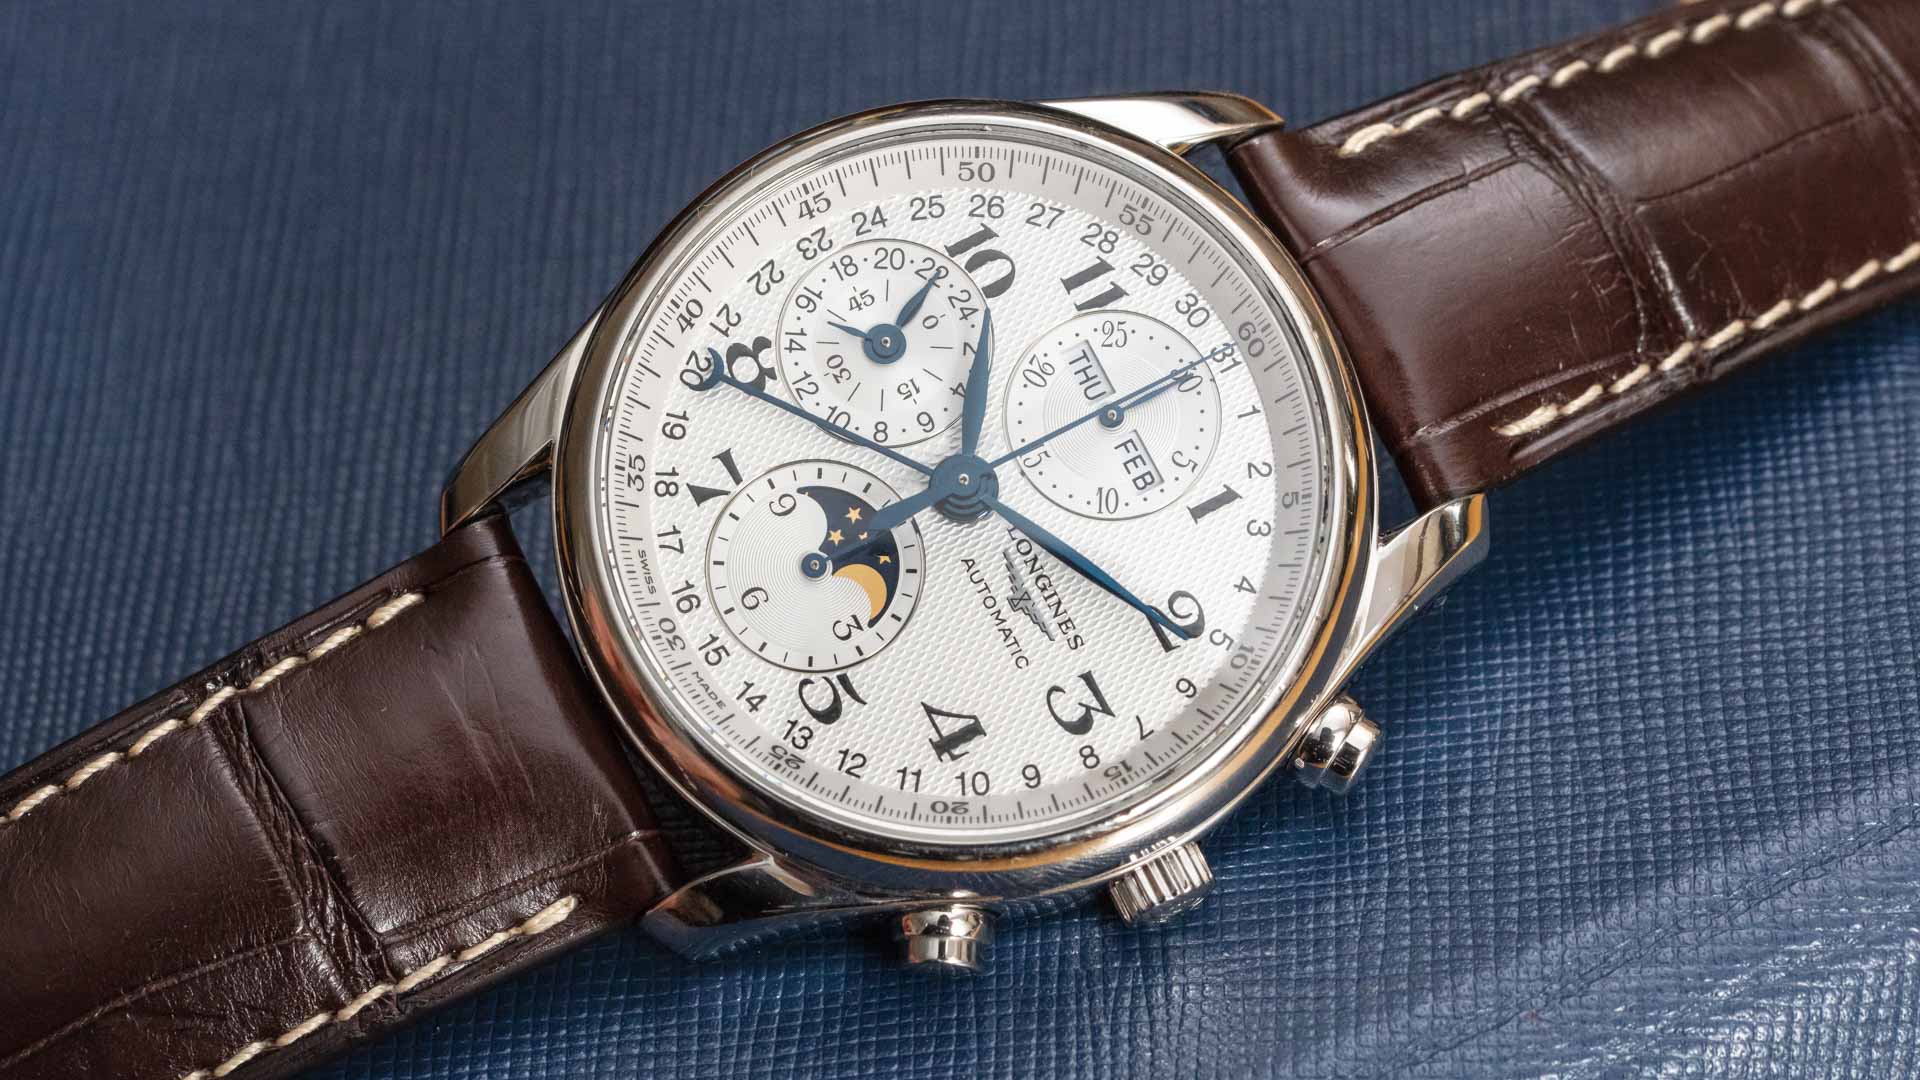 master collection gmt moonphase men's watch